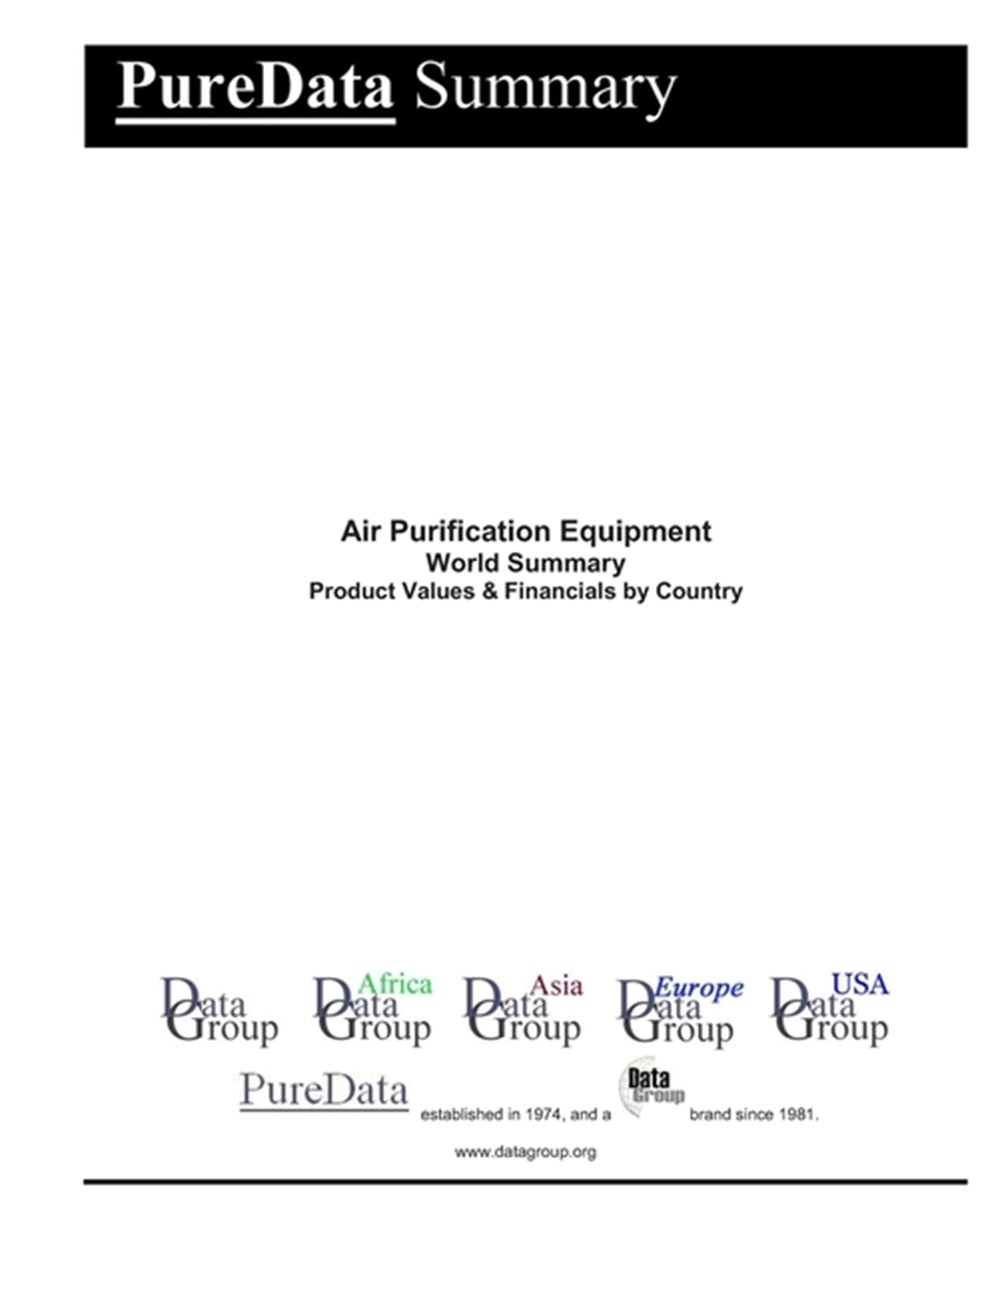 Air Purification Equipment World Summary Product Values & Financials by Country